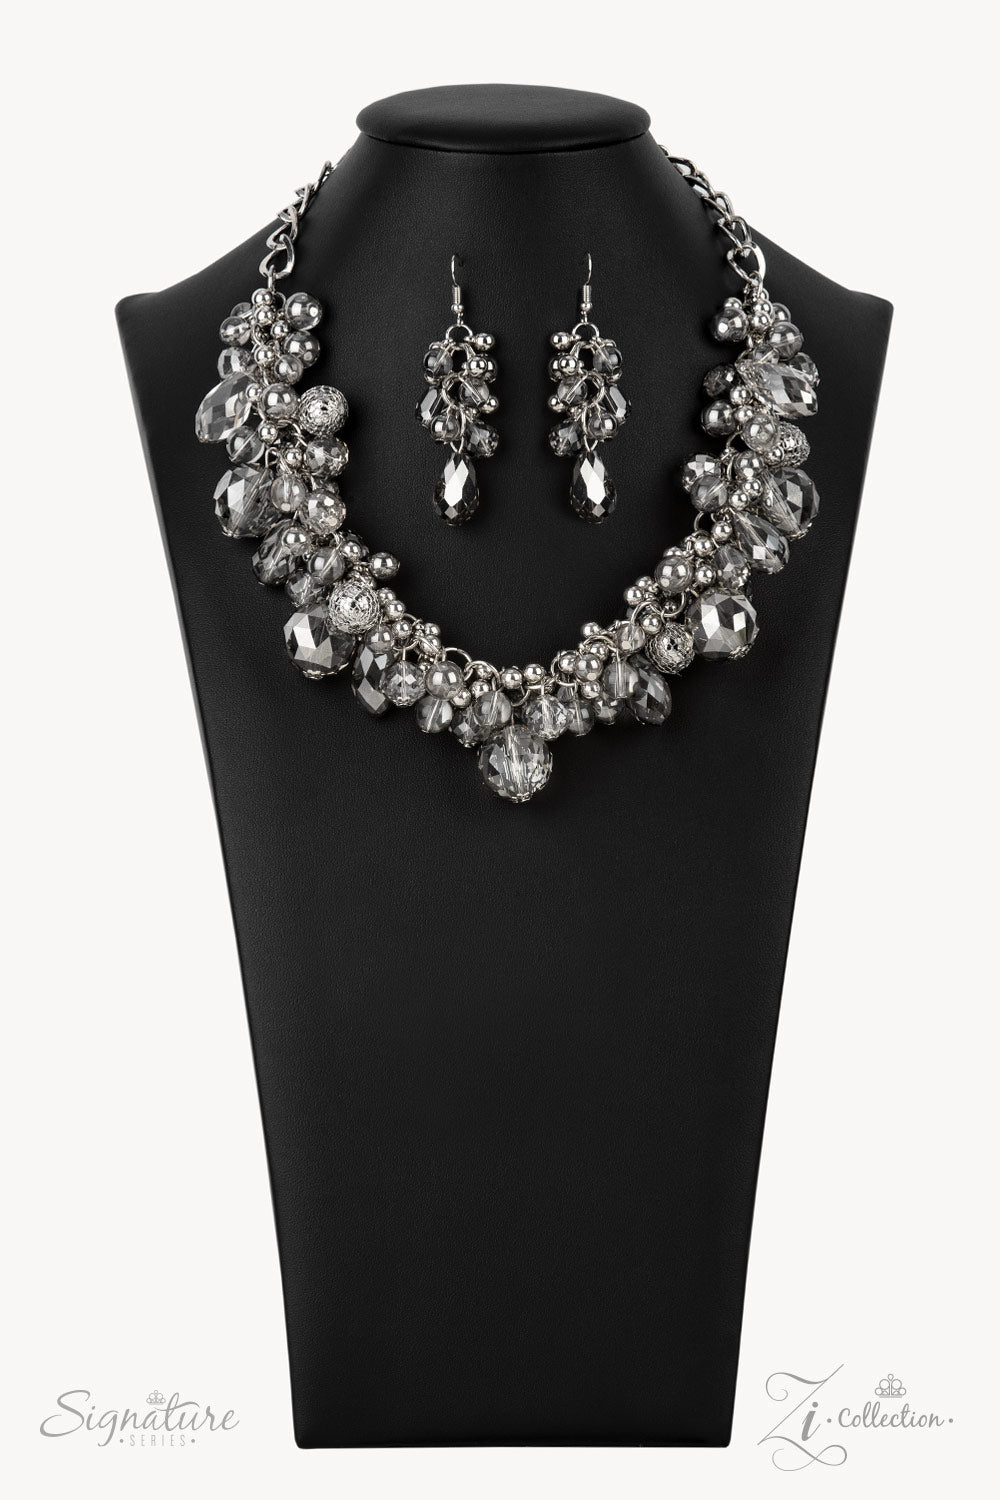 Paparazzi Jewelry & Accessories - The Tommie - Signature Zi Collection. Bling By Titia Boutique